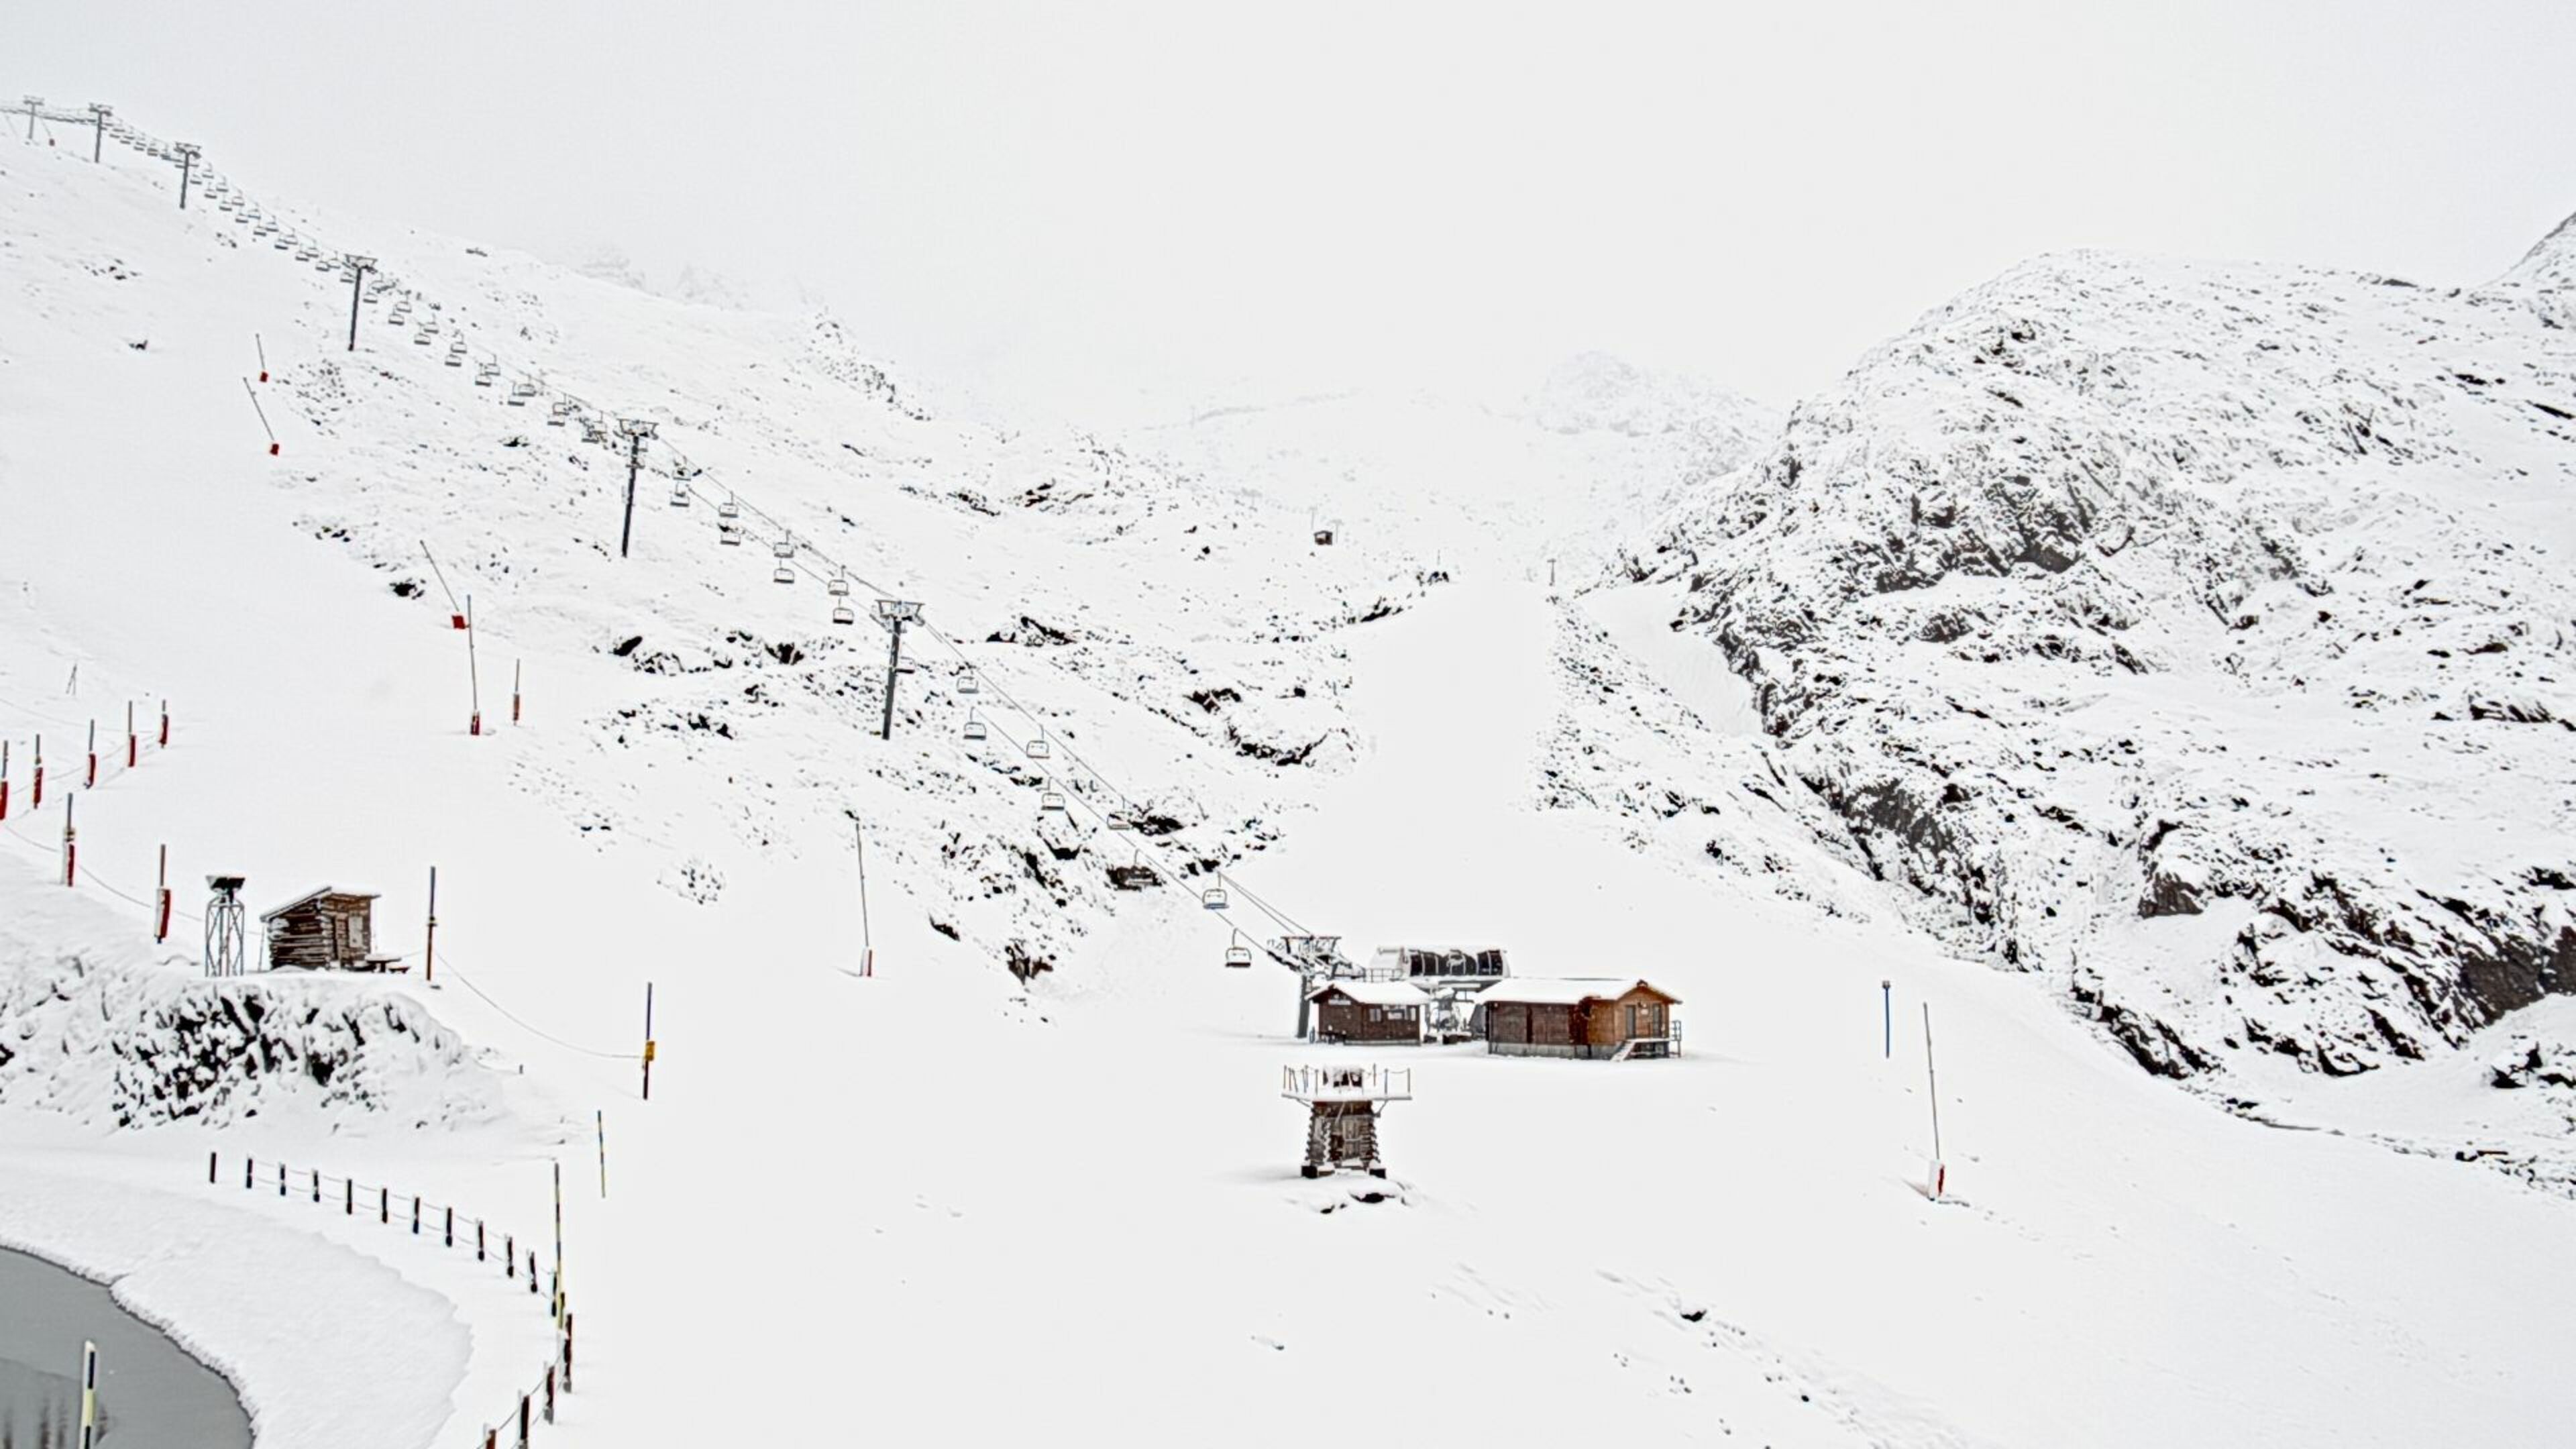 It has been snowing for several hours in the French Alps (skaping.com)